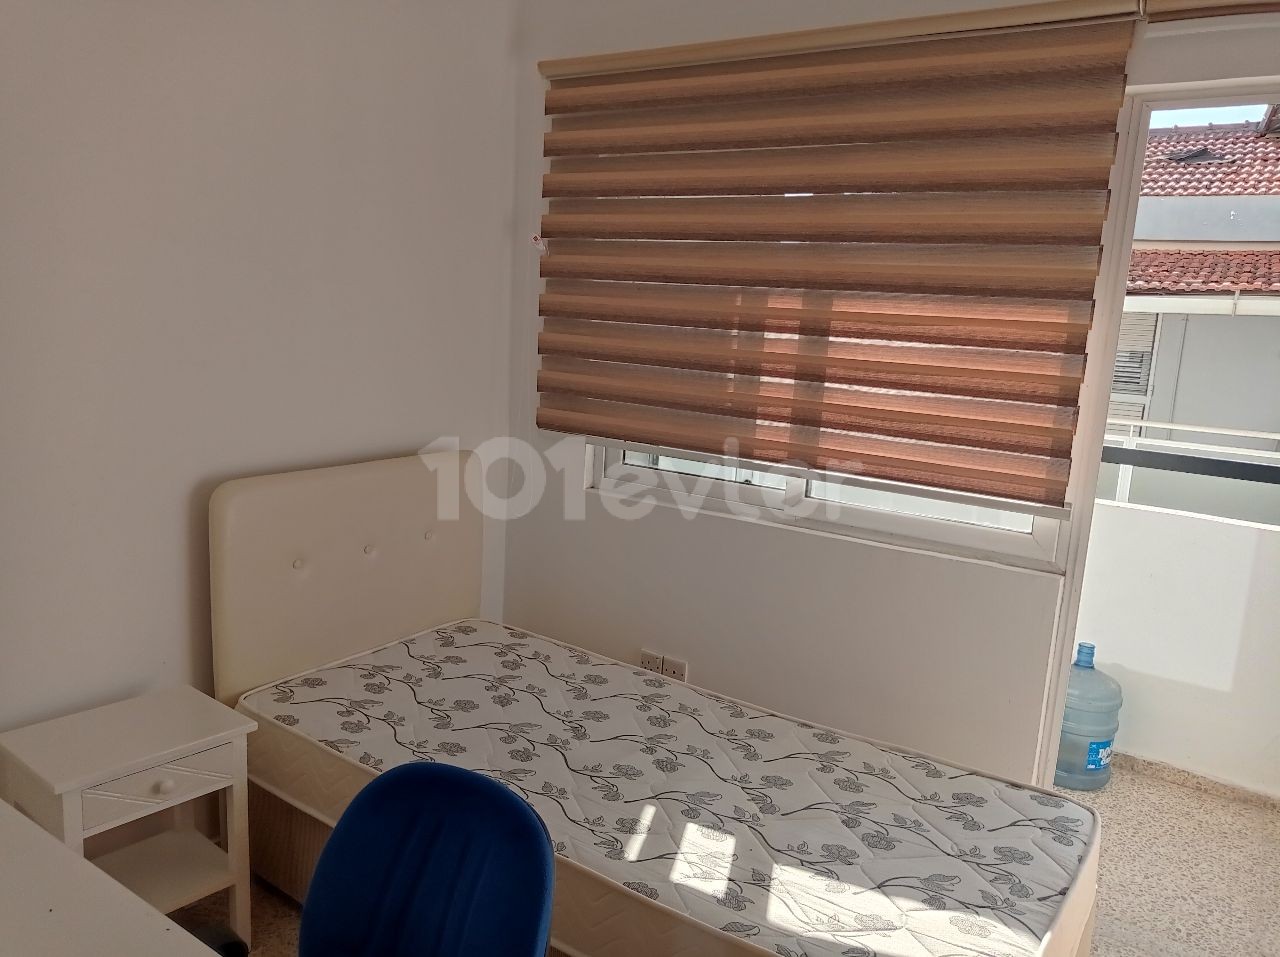 3 + 1 apartments for rent in the central location in the Yenikent district. ** 